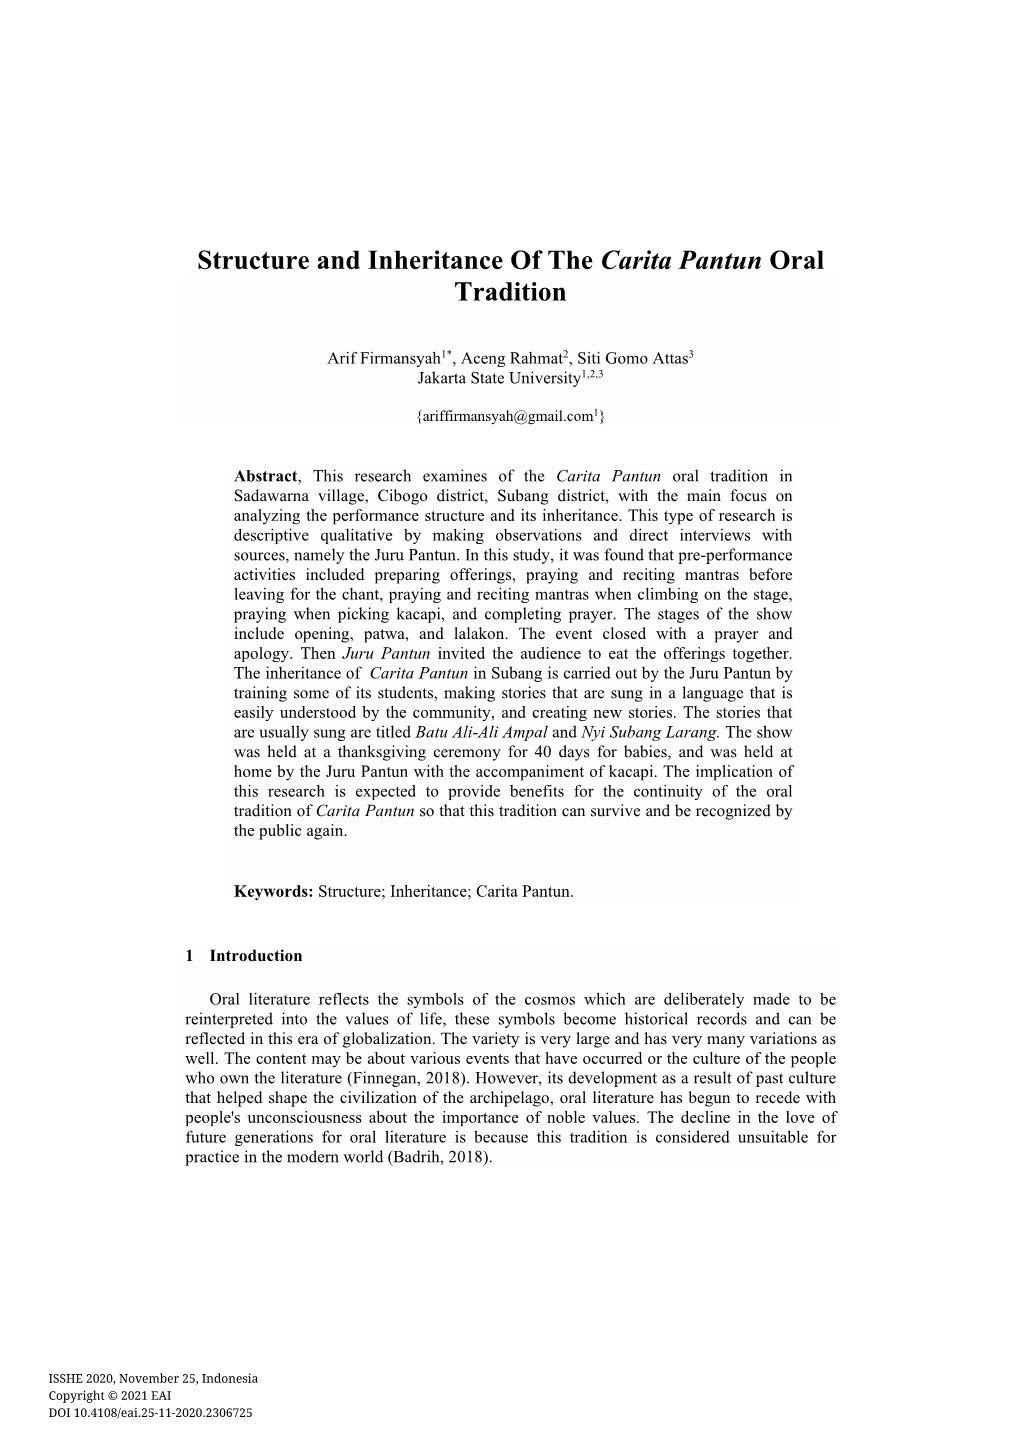 Structure and Inheritance of the Carita Pantun Oral Tradition